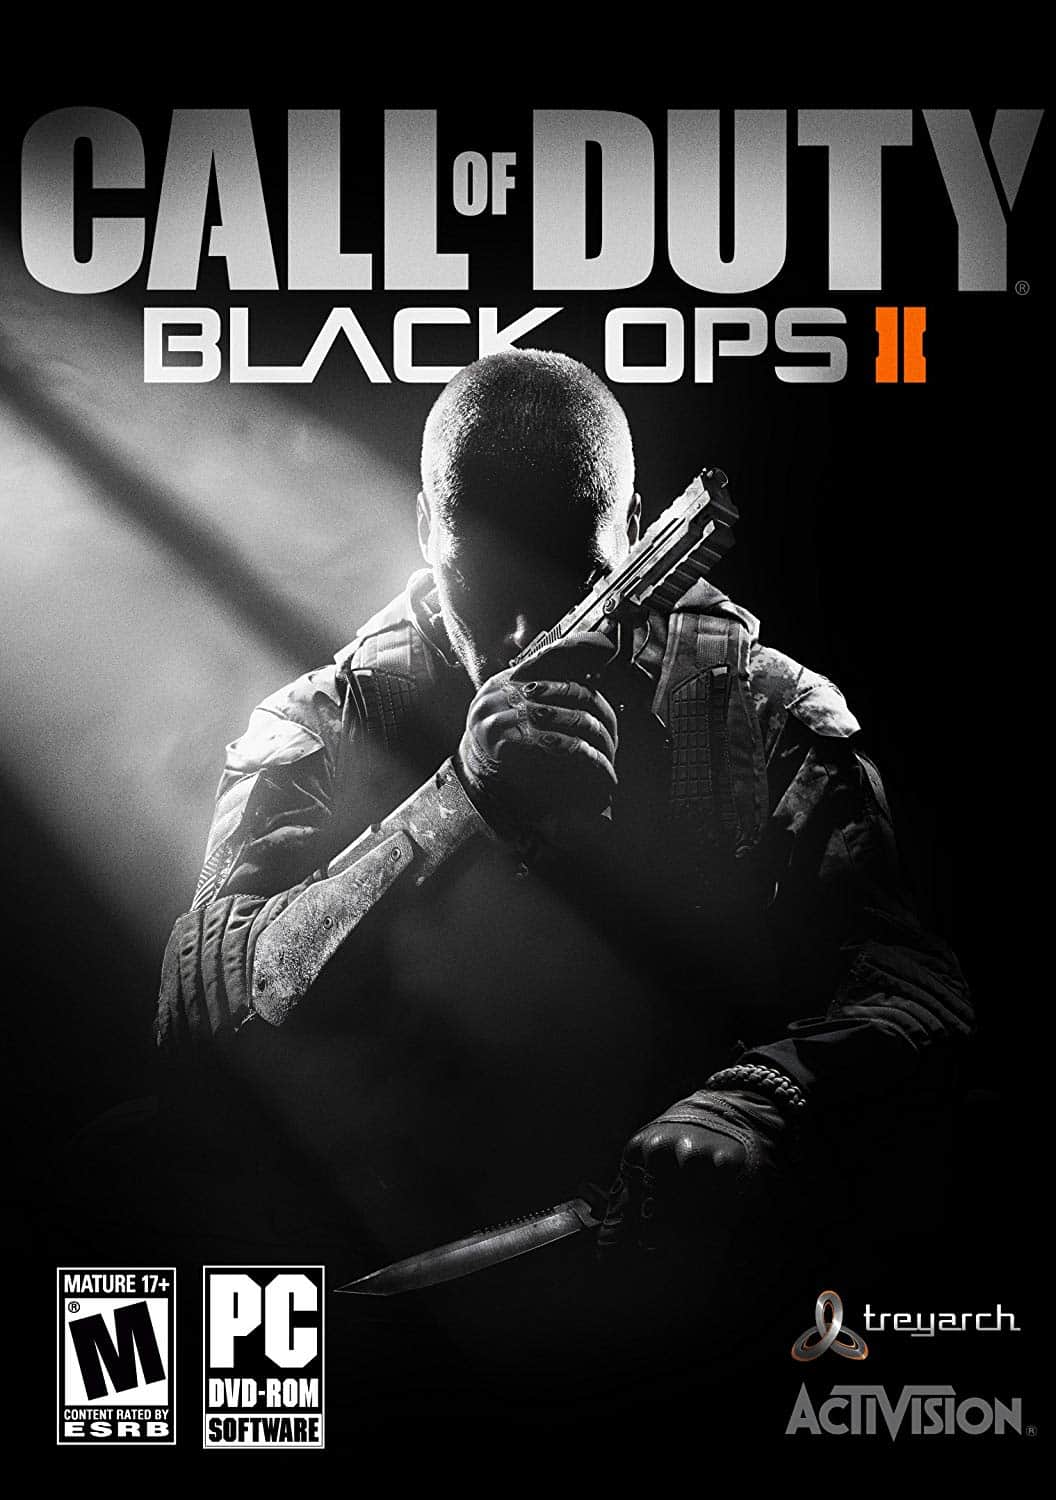 CALL OF DUTY 2 PC GAME DOWNLOAD LINKS 100% WORKING!!!!